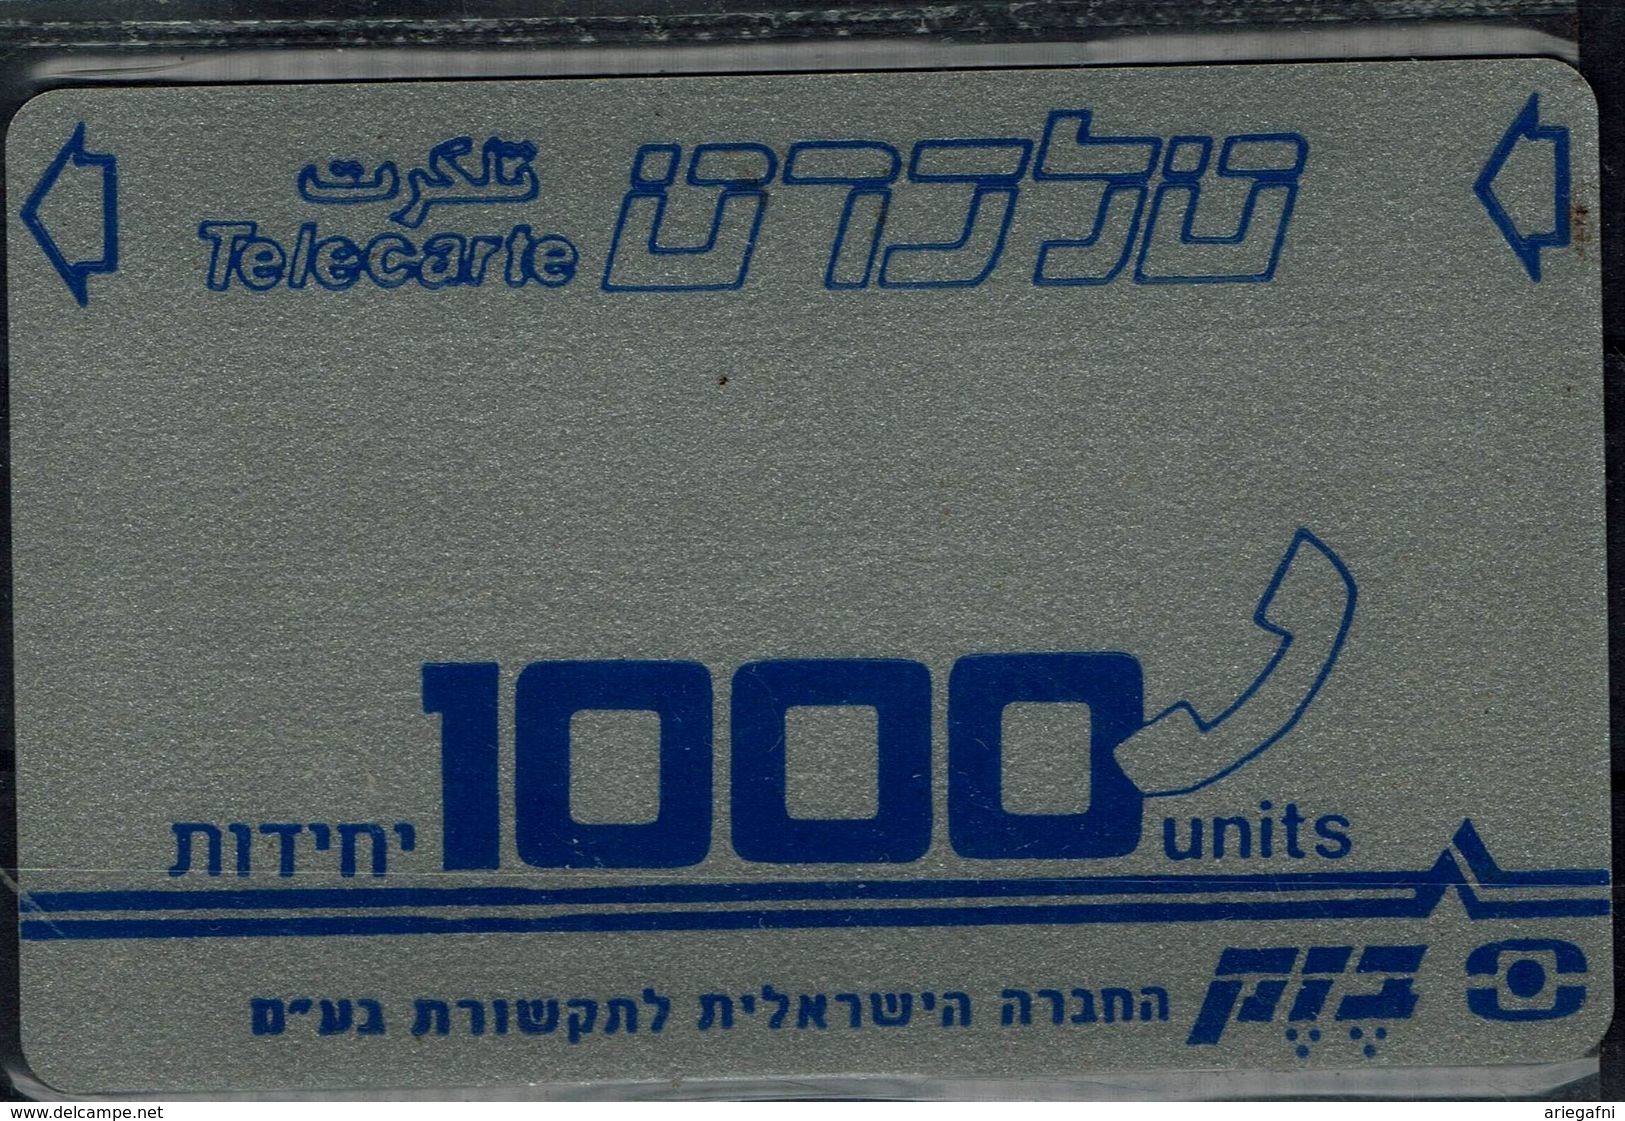 ISRAEL 1990 BEZEQ PHONECARD MAGNETIC TRIAL CARDS THE HUNGARIAN CARDS 1000 UNITS  MINT VF!! - Israel